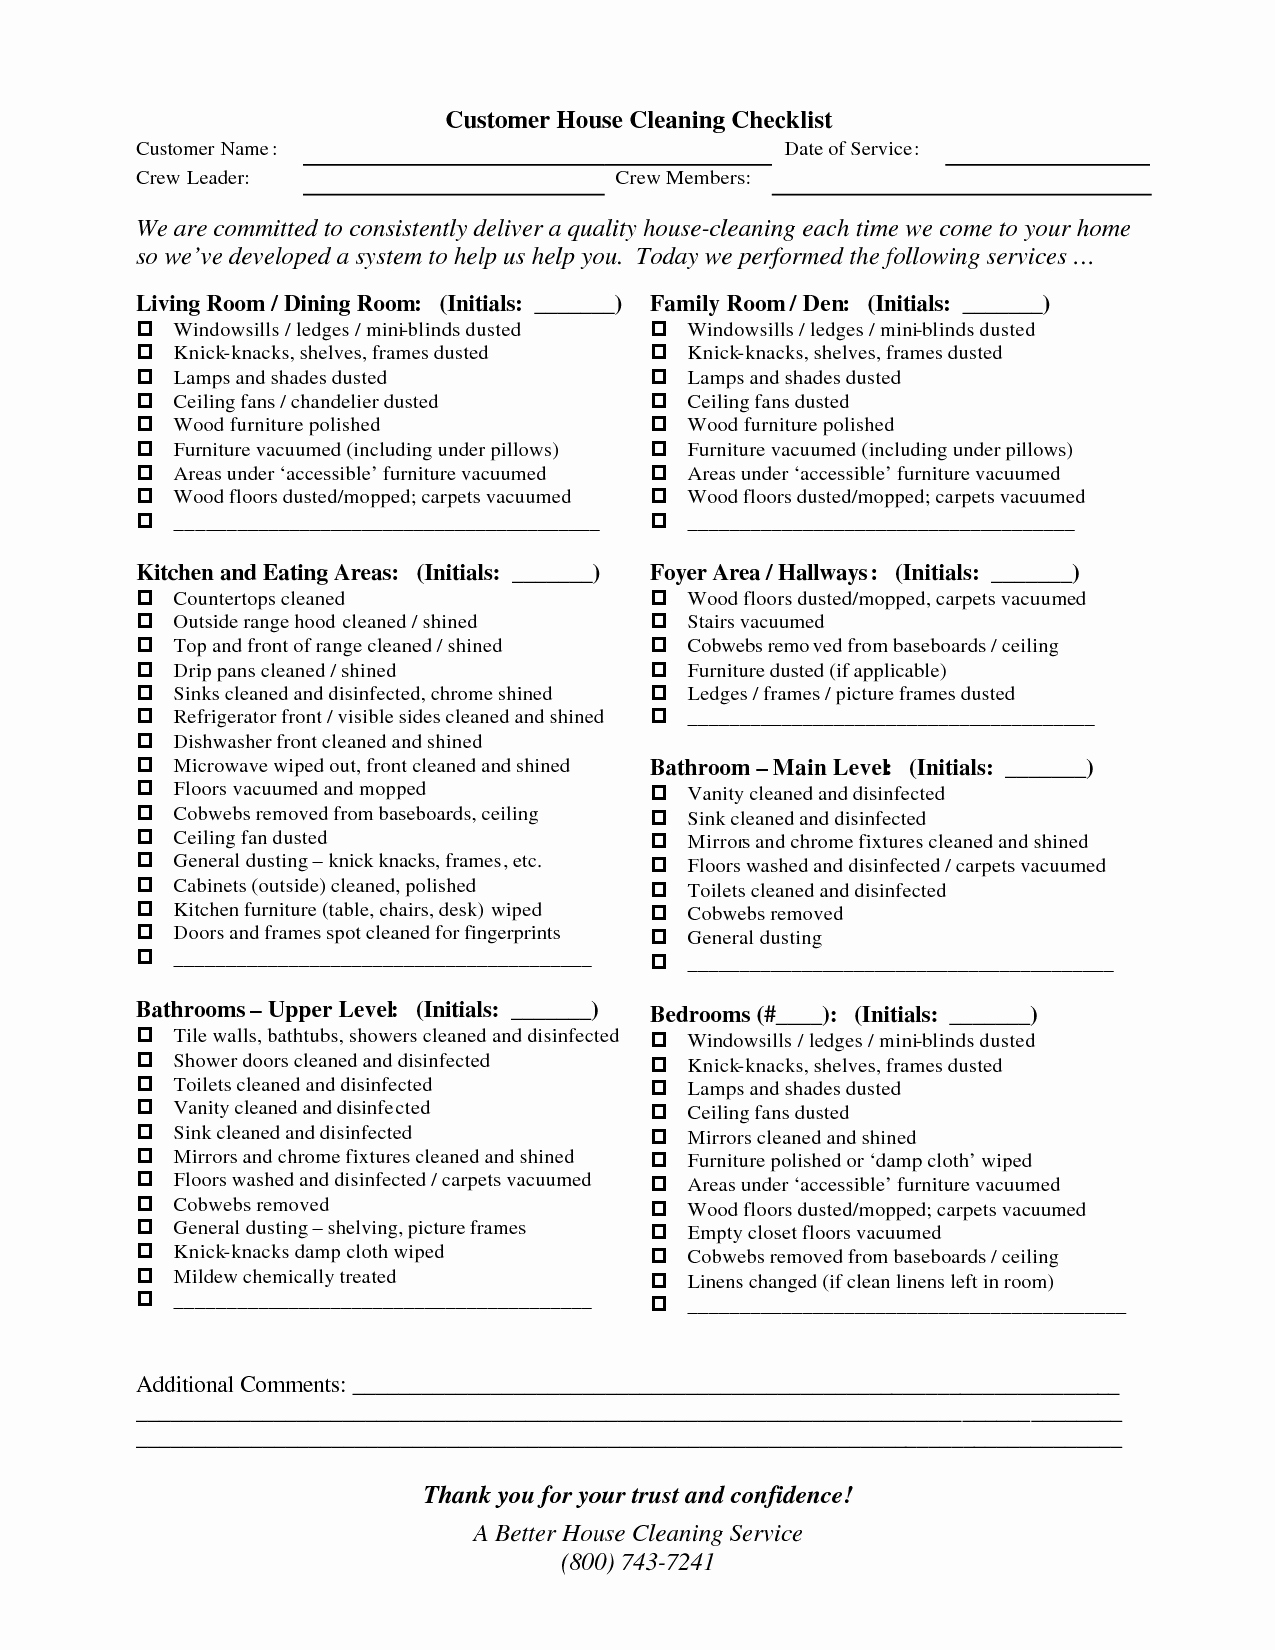 Residential Cleaning Checklist Template Luxury Professional House Cleaning Checklist 2